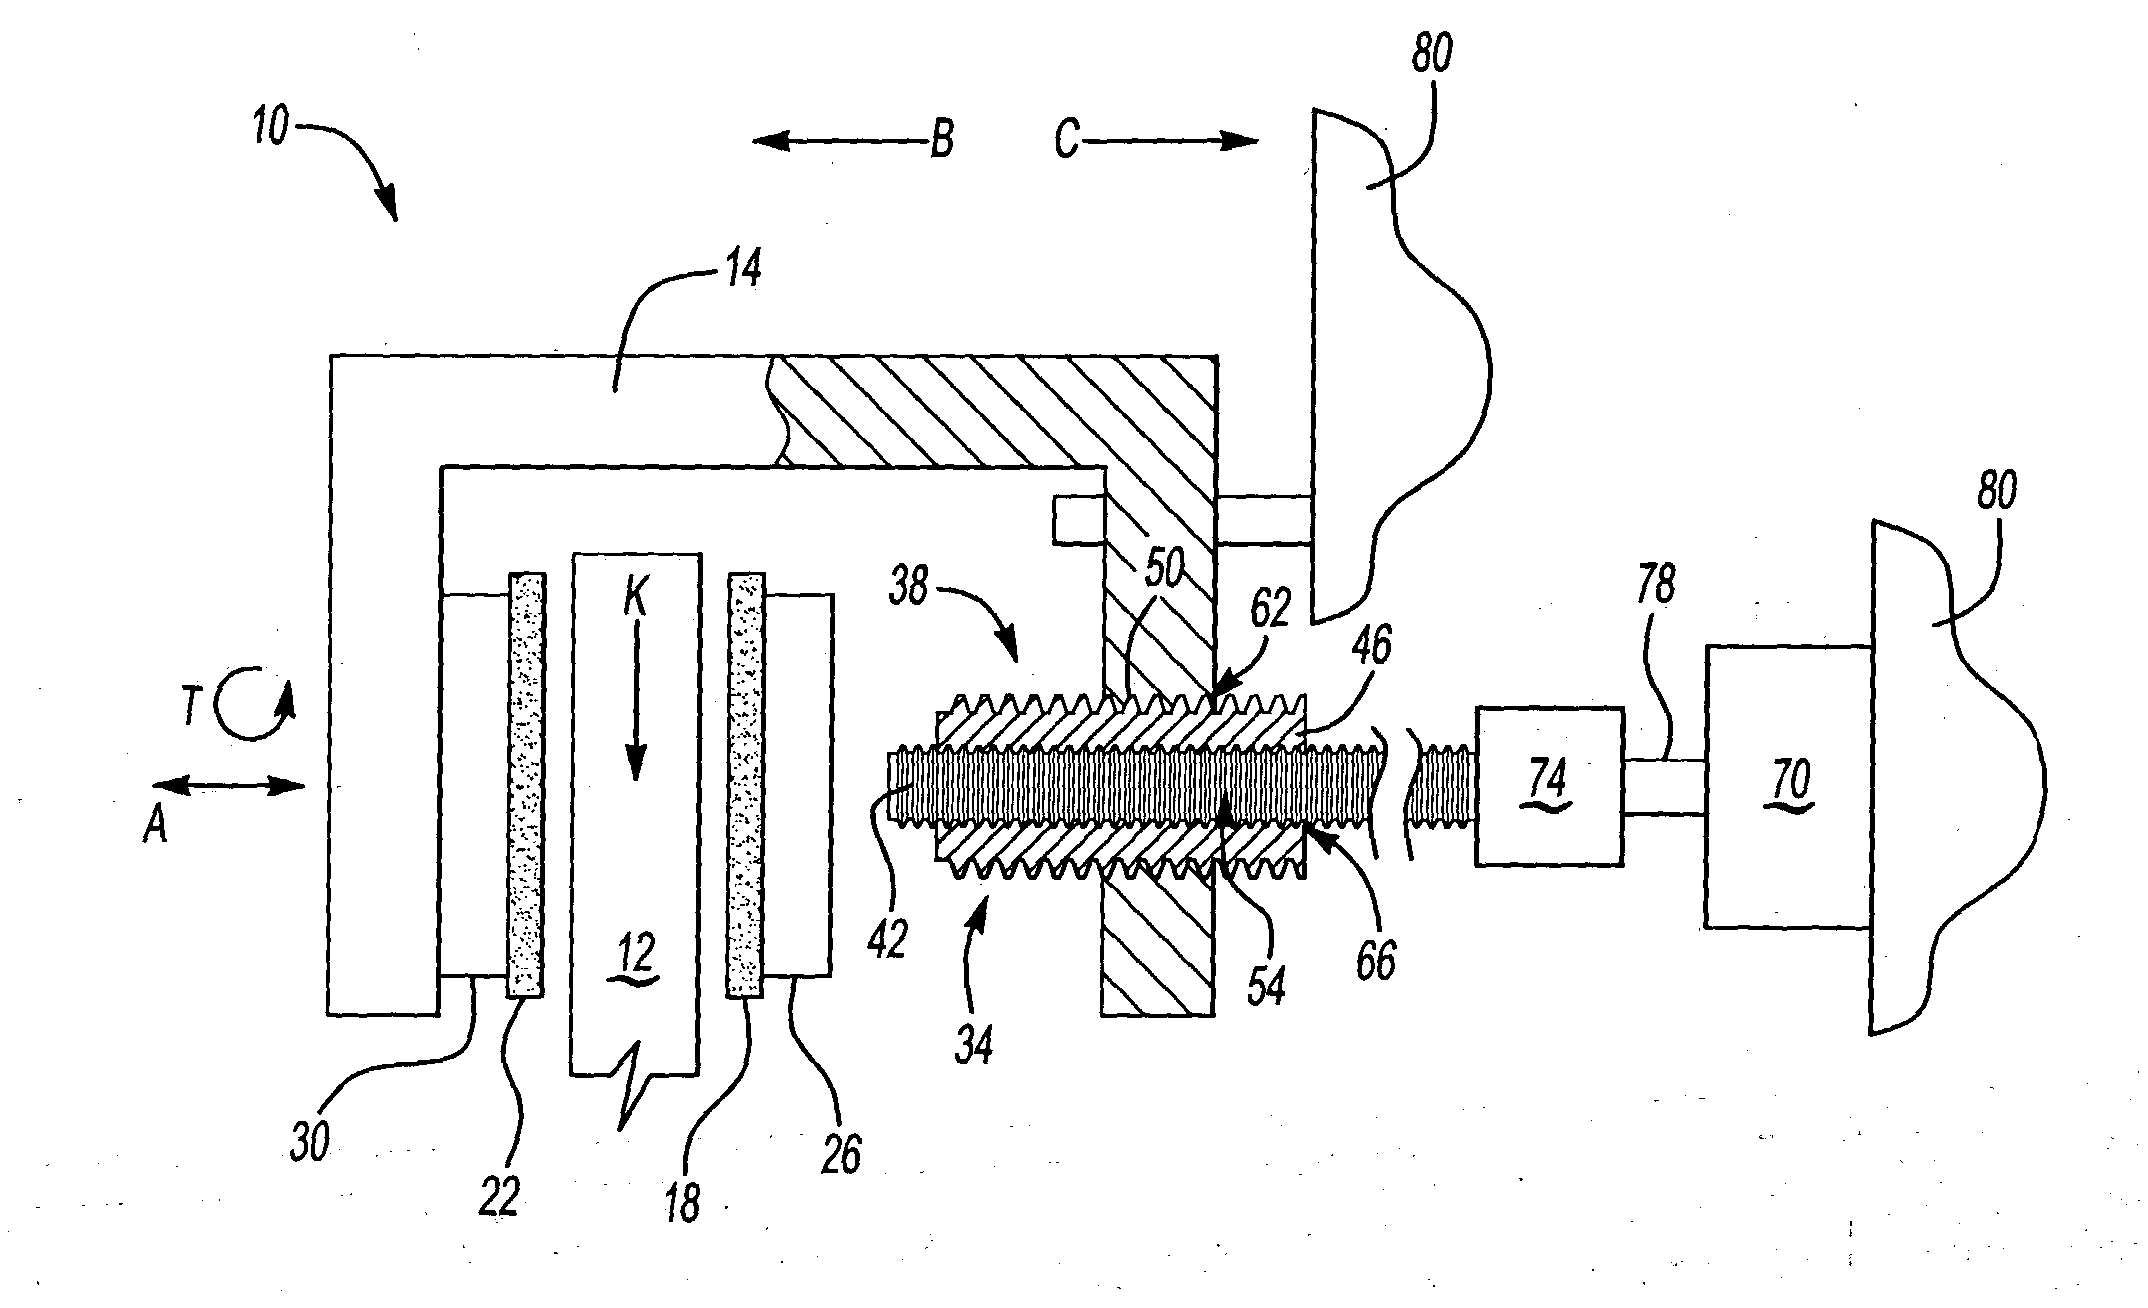 Multiple ball screw assembly with differing pitch used to optimize force and displacement of brake actuator